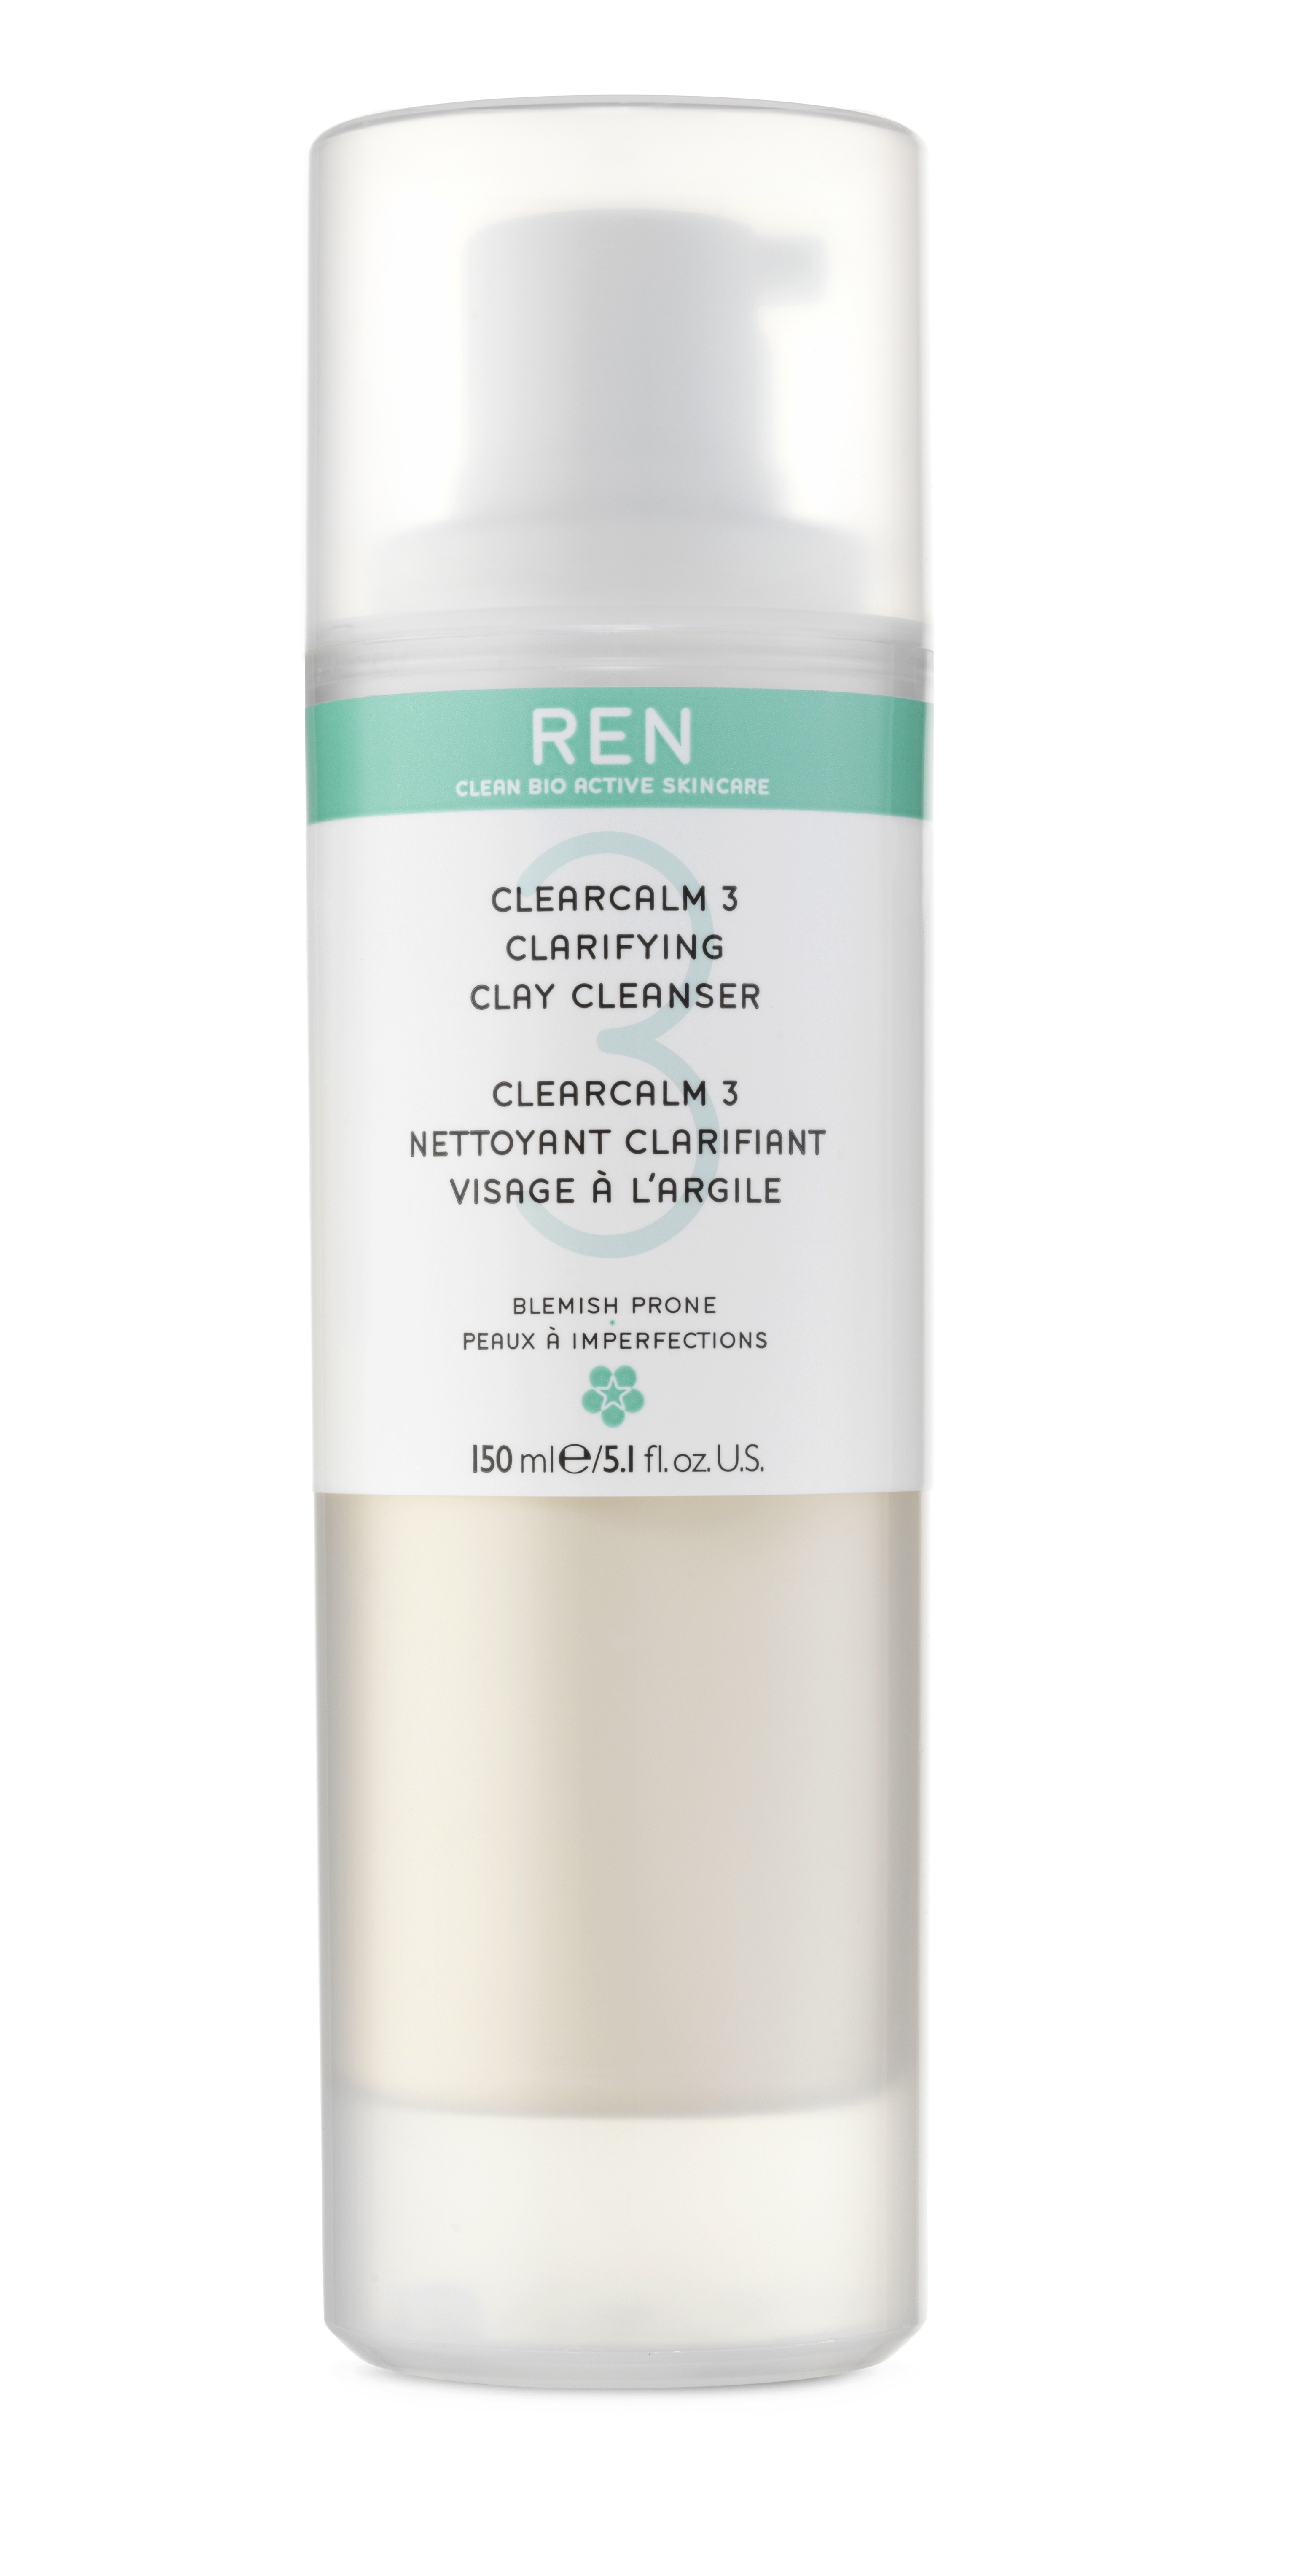 REN Face ClearCalm 3 Clarifying Clay Cleanser